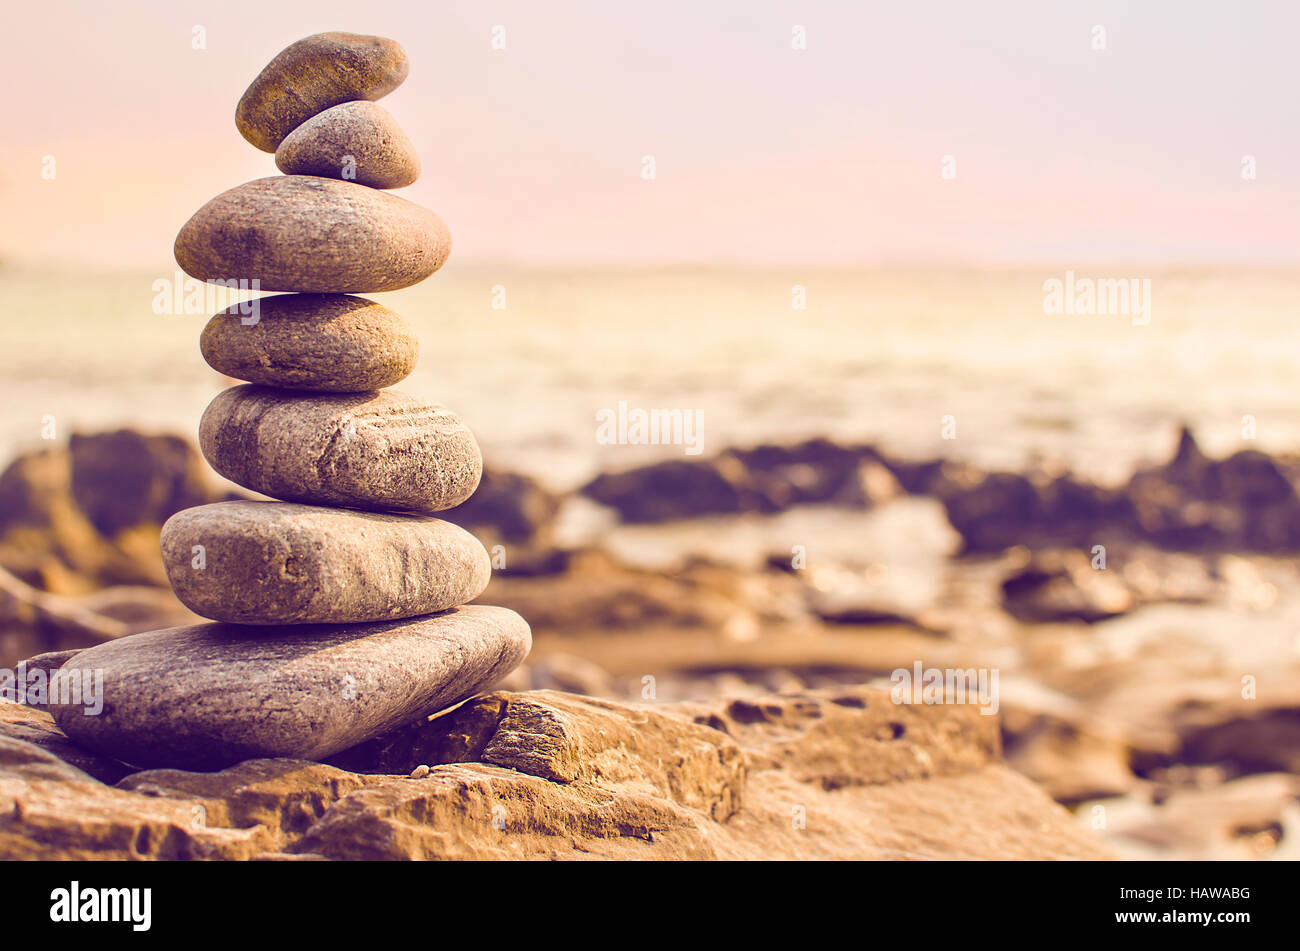 Stones laid out in the form of a pyramid on the seashore Stock Photo